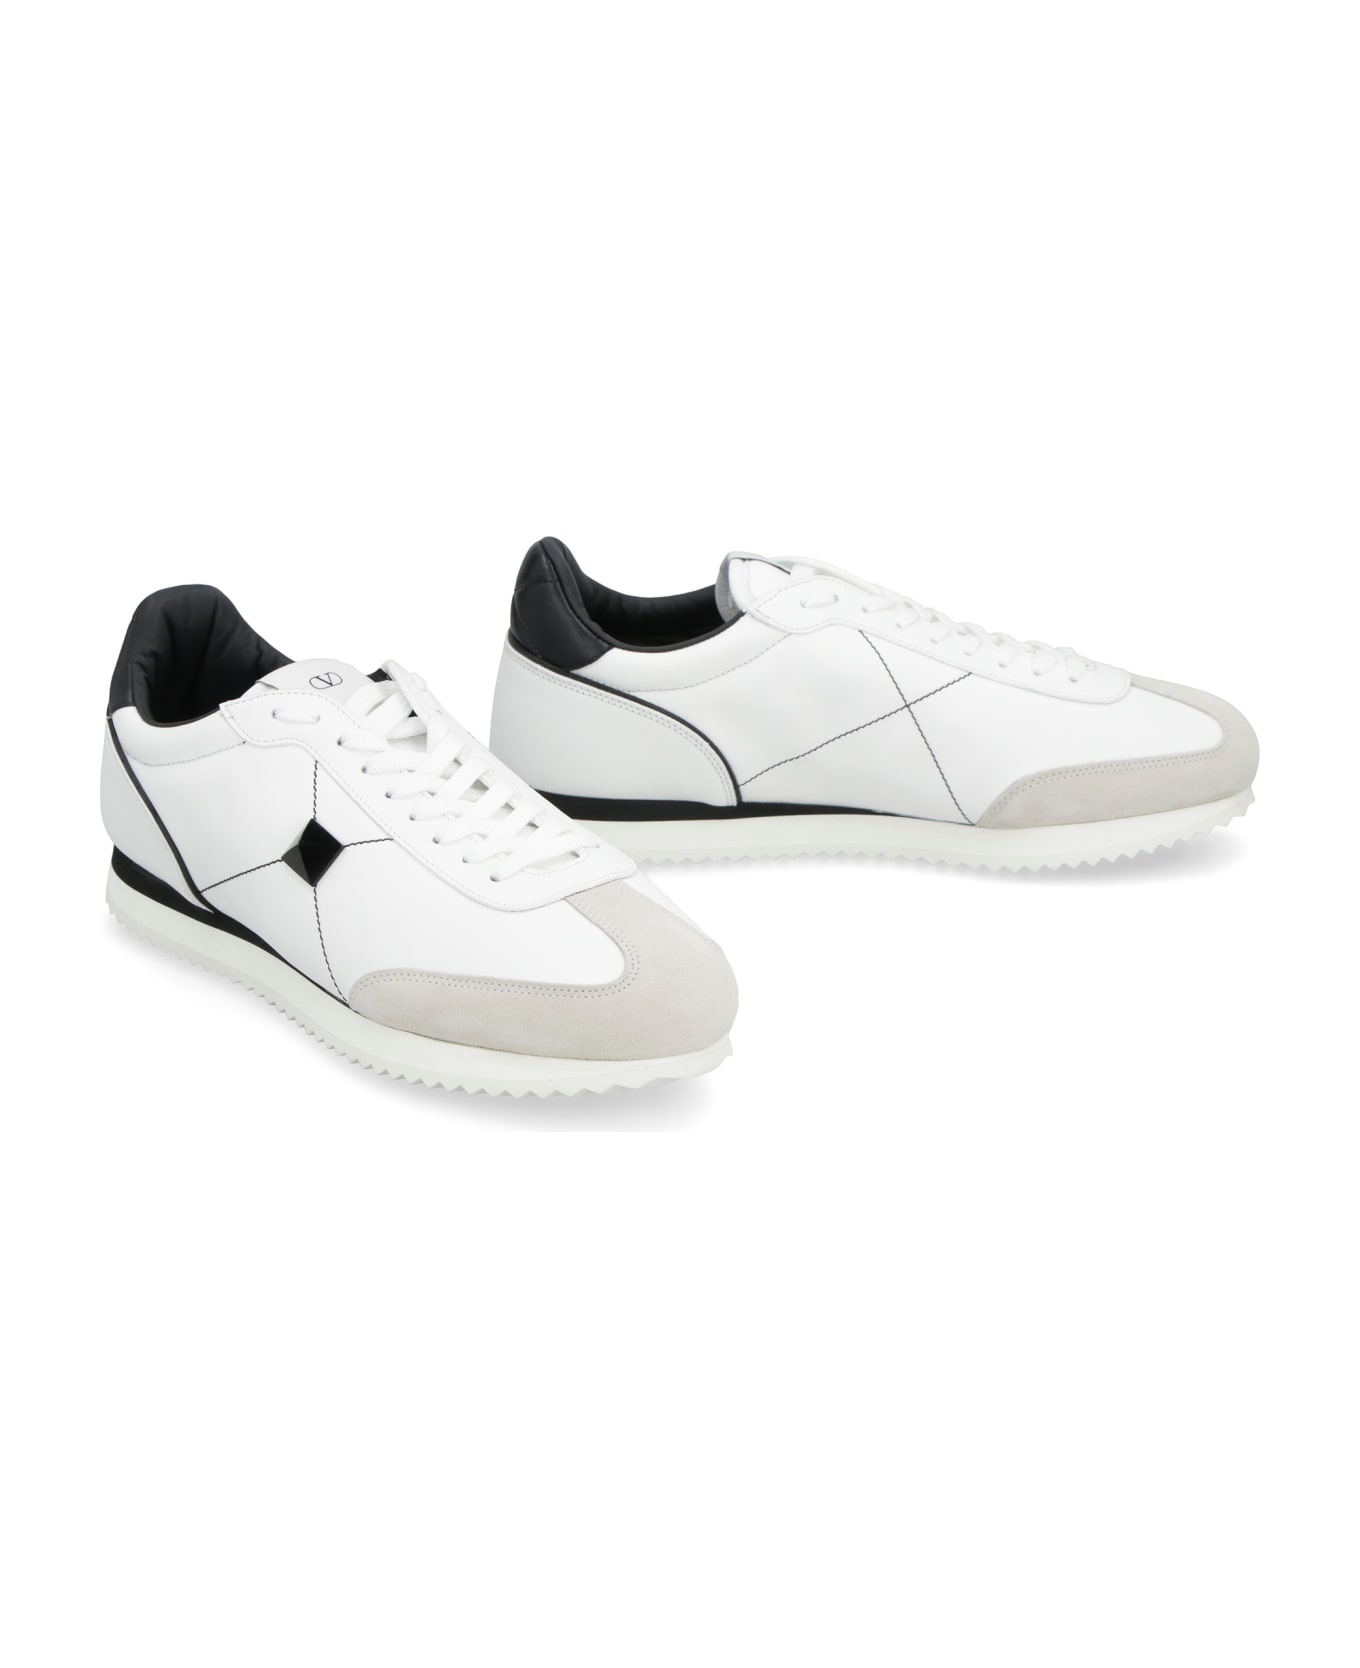 Valentino Garavani White Low Top Sneakers In Calf Leather And Nappa Leather - White スニーカー